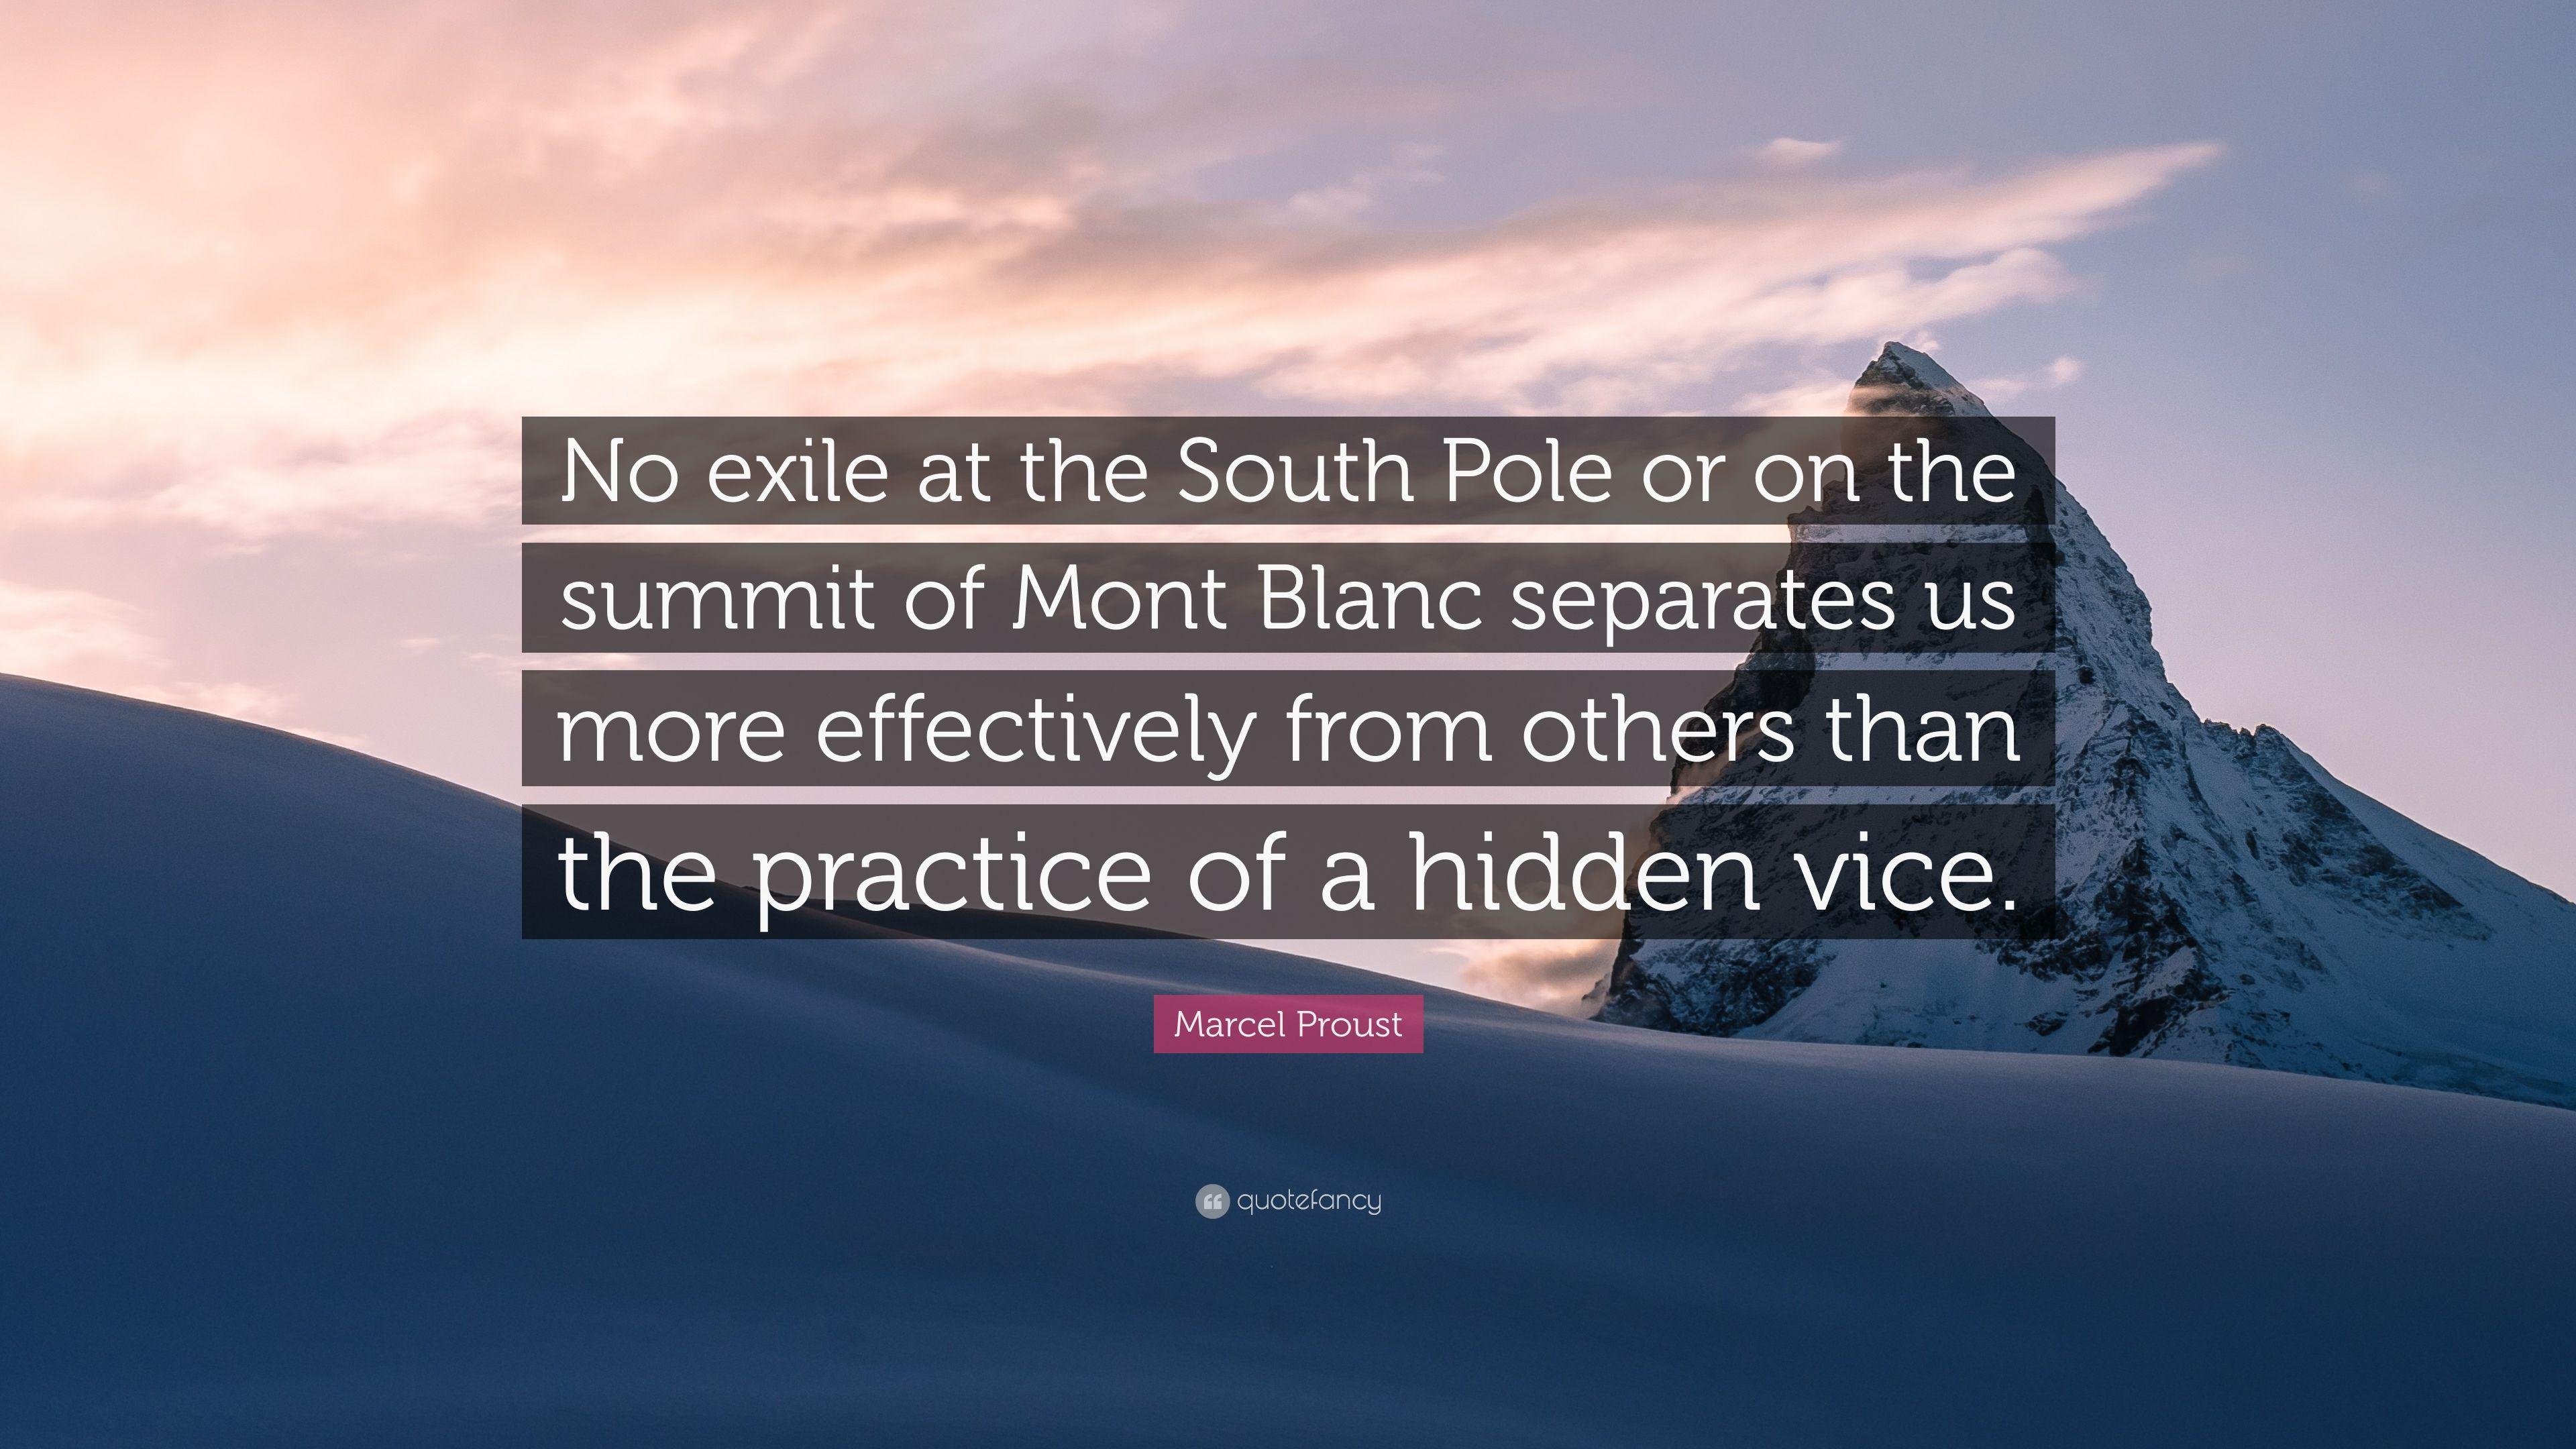 Marcel Proust Quote: “No exile at the South Pole or on the summit